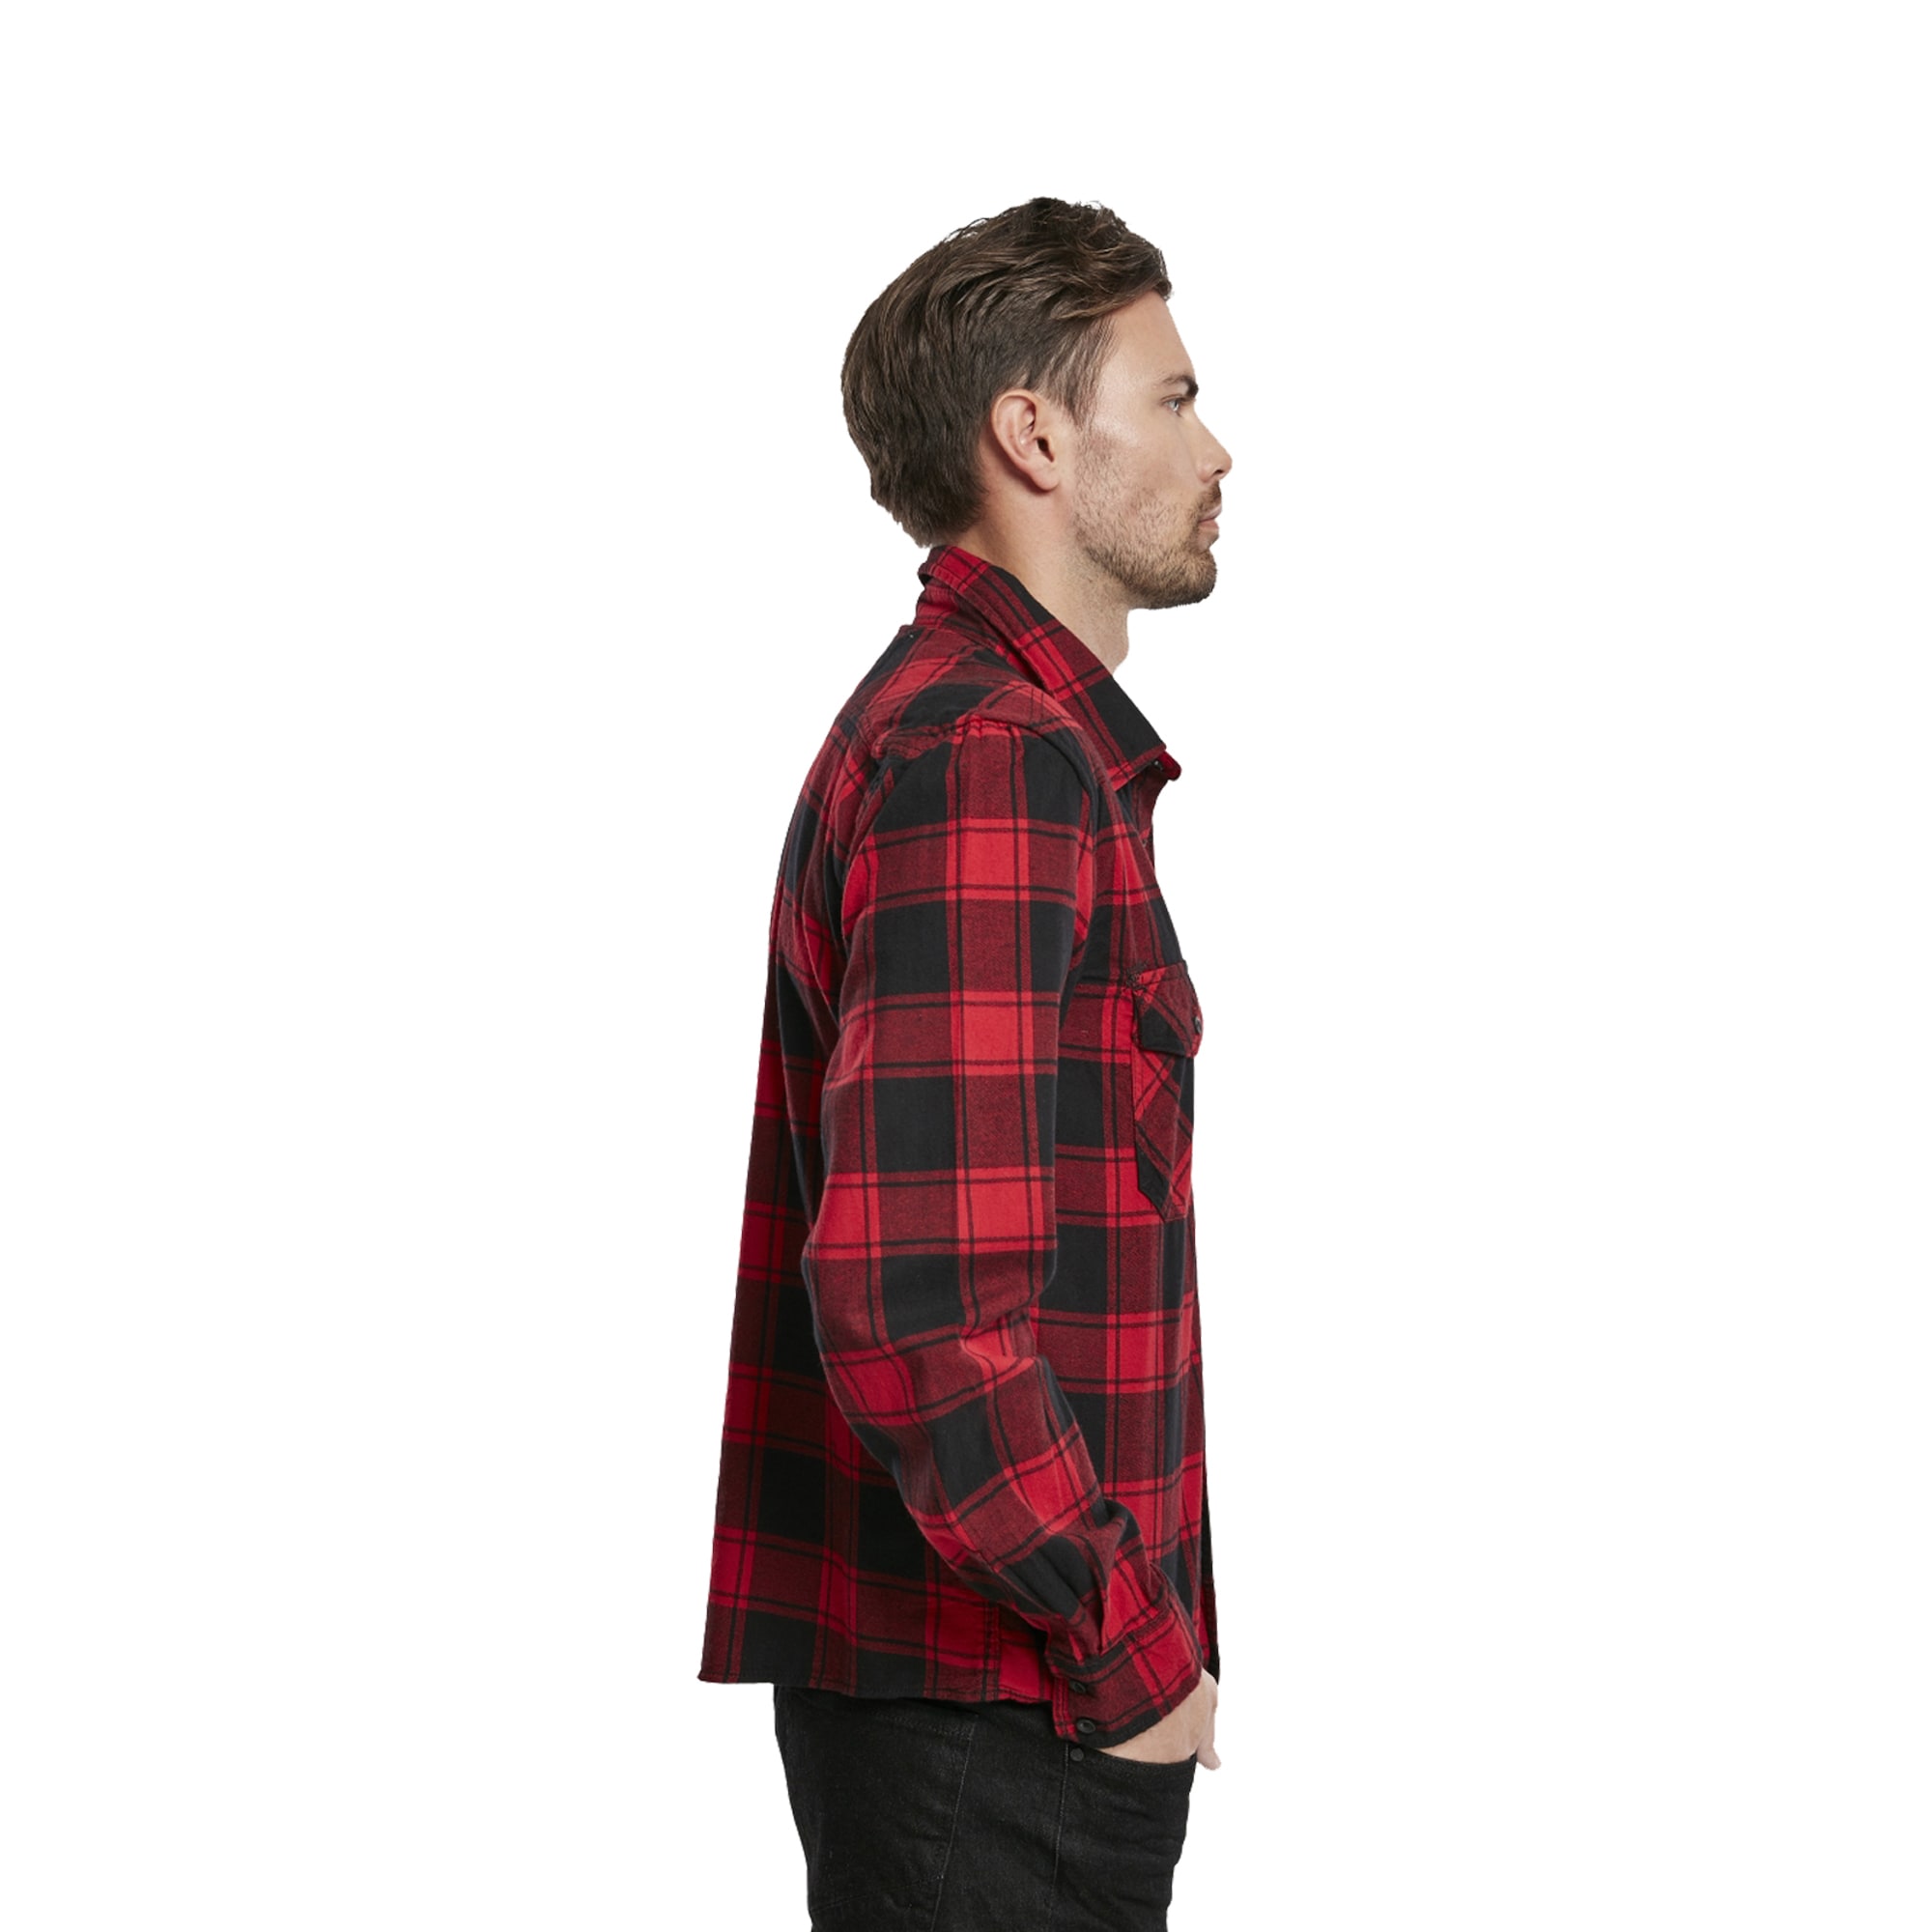 Purchase by the Shirt ASMC Brandit red black Check